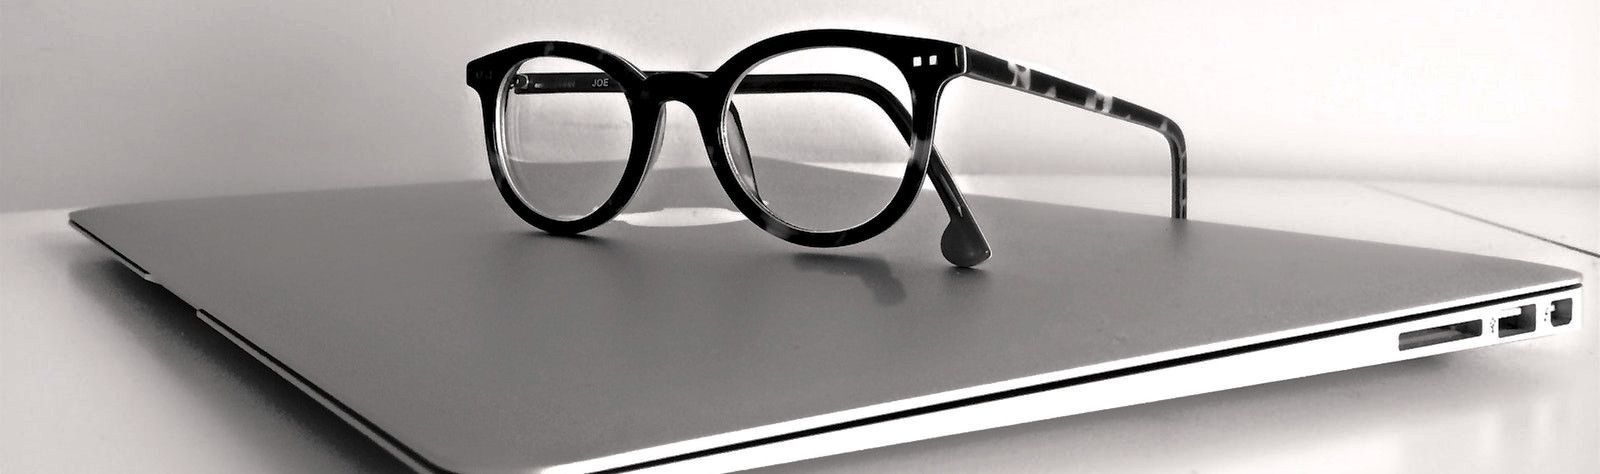 Sideview photo of a pair of round, black horn rim glasses sitting on top of a closed silver Mac laptop. The laptop is set on a white table and the background is light grey.